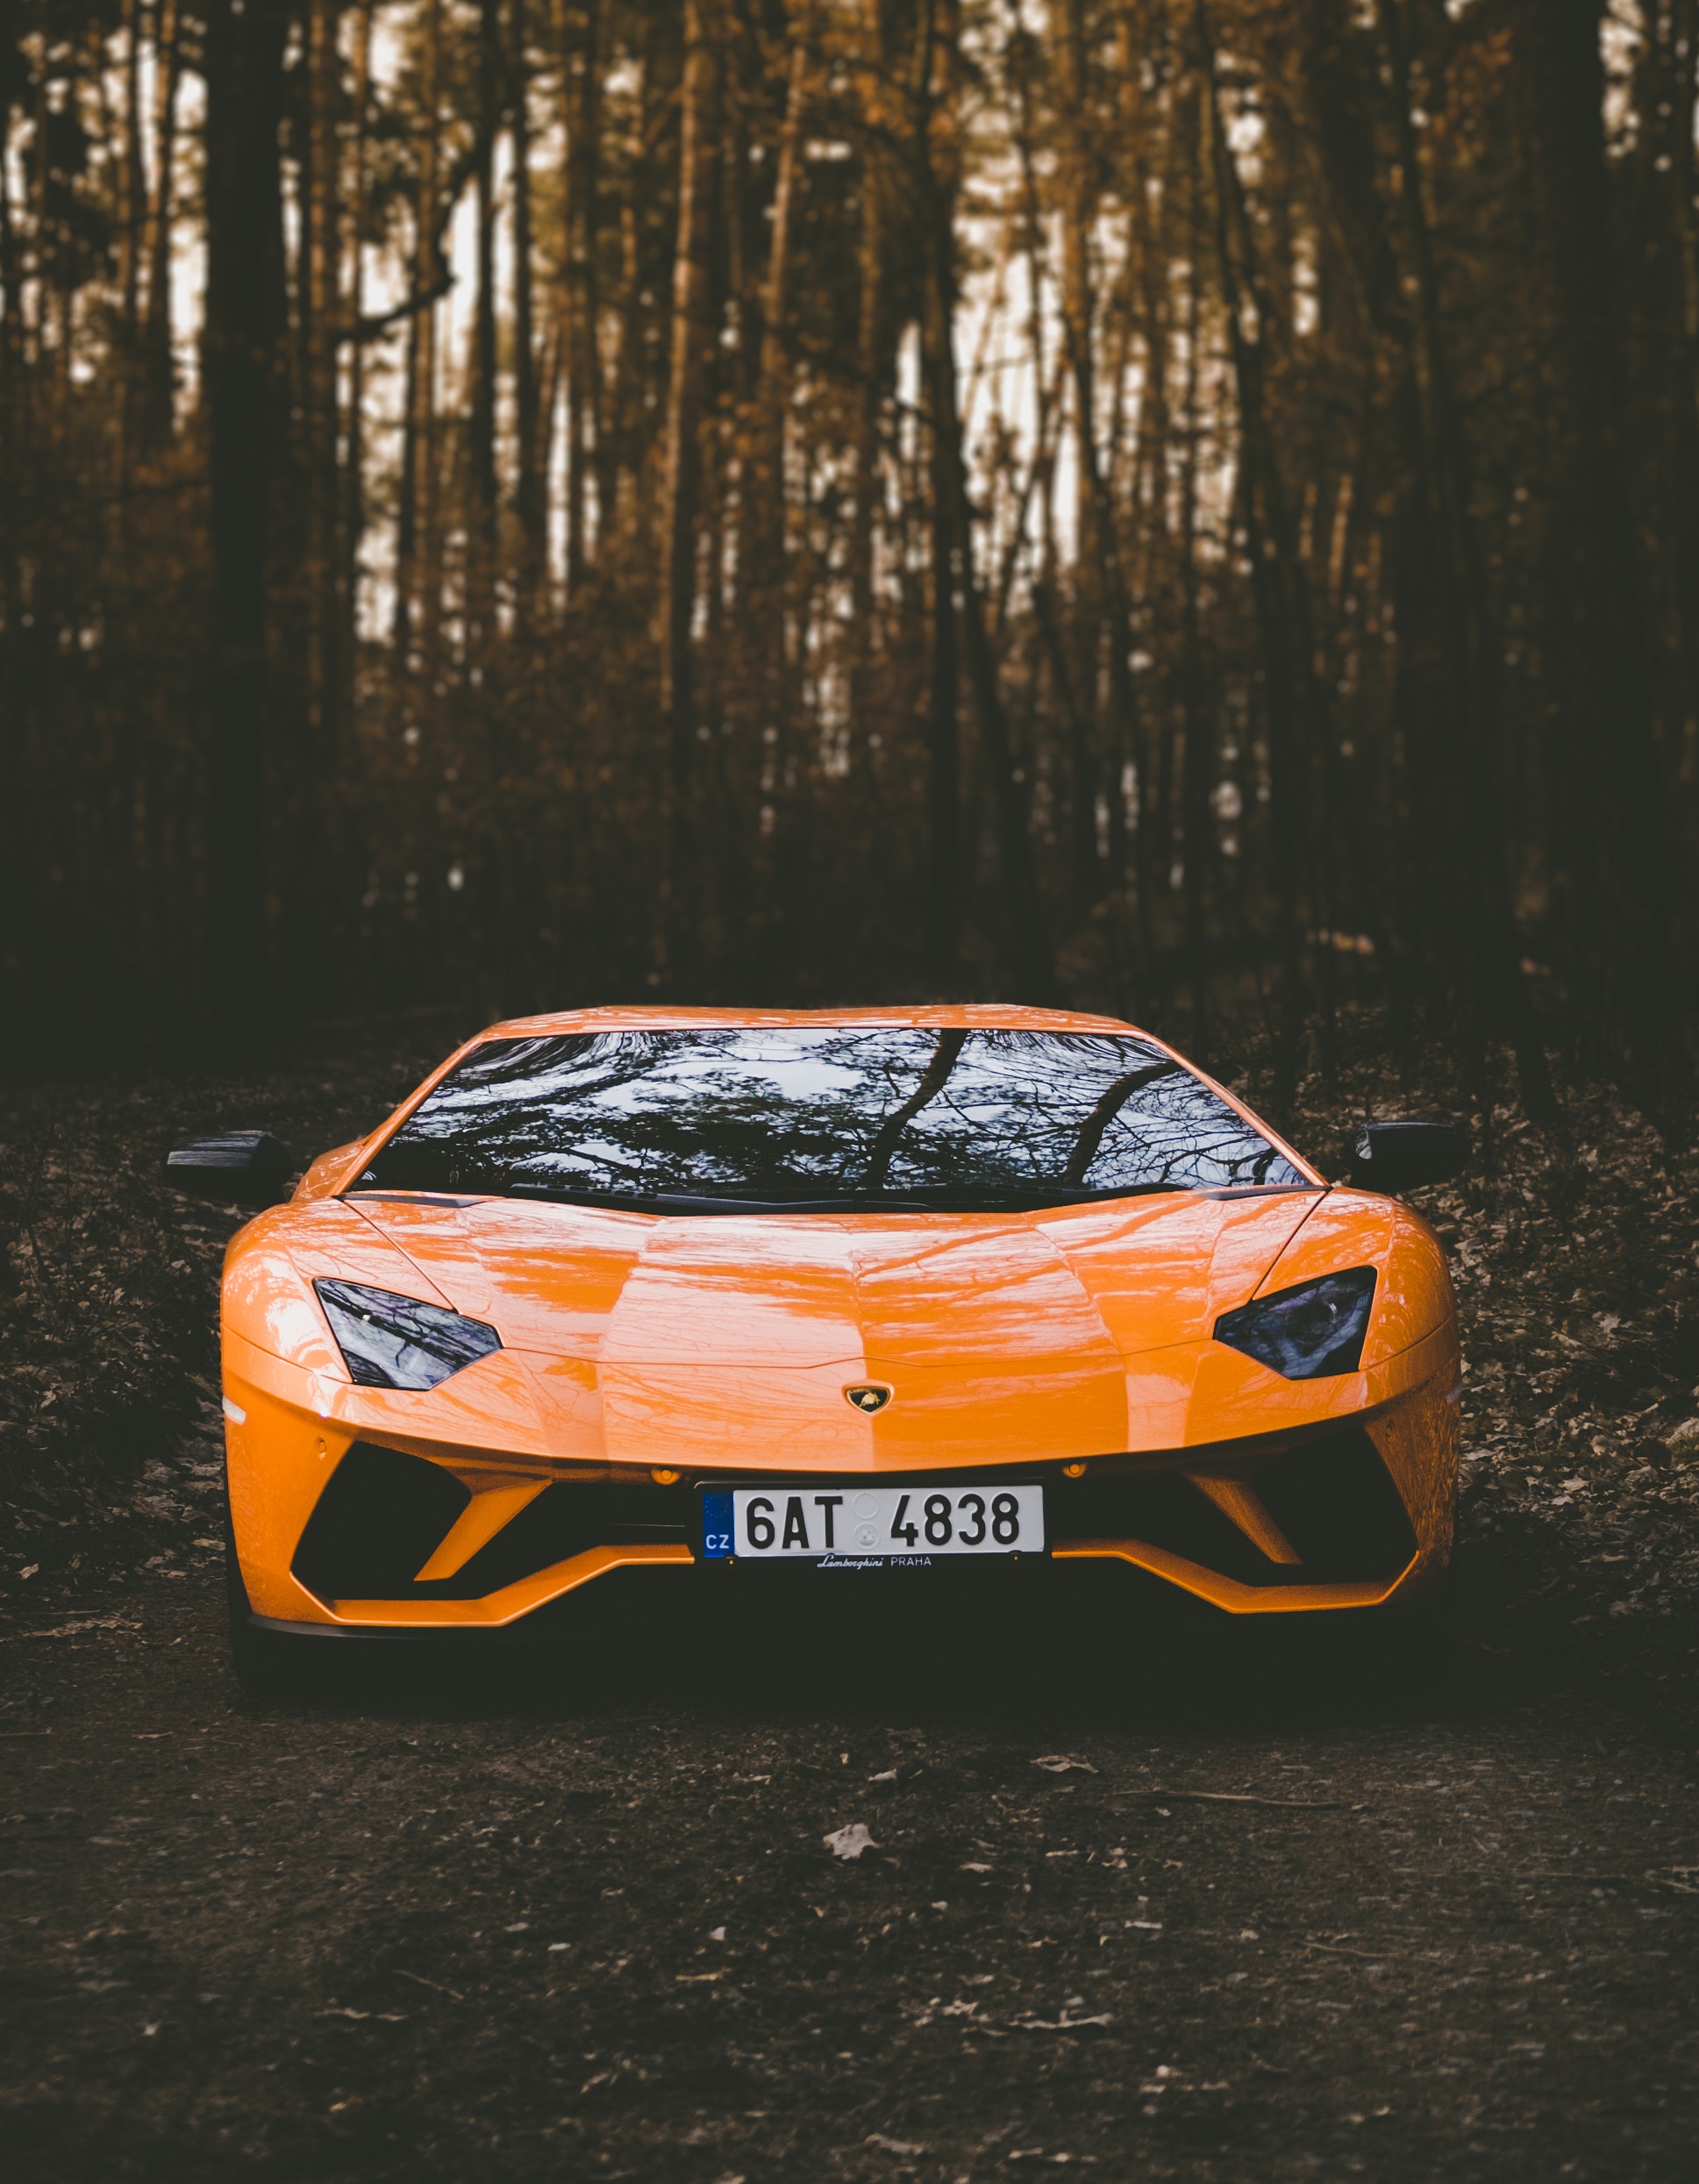 140373 download wallpaper sports, cars, front view, sports car, style, bumper screensavers and pictures for free